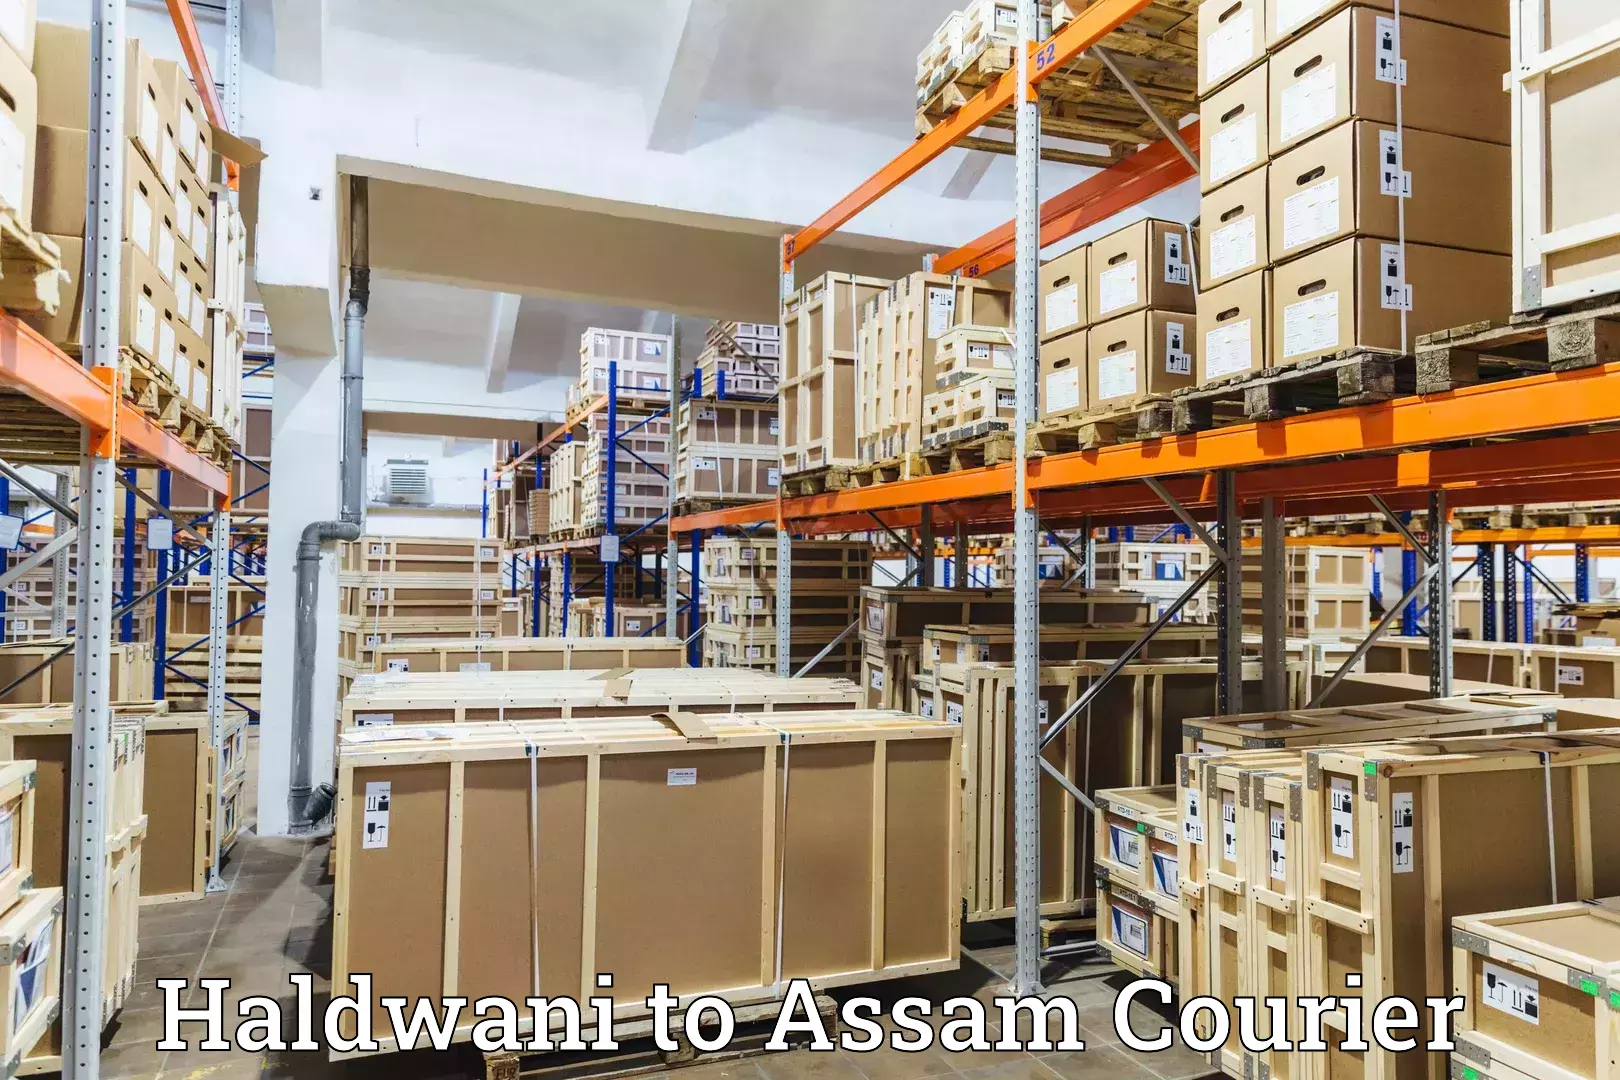 Delivery service partnership in Haldwani to Assam